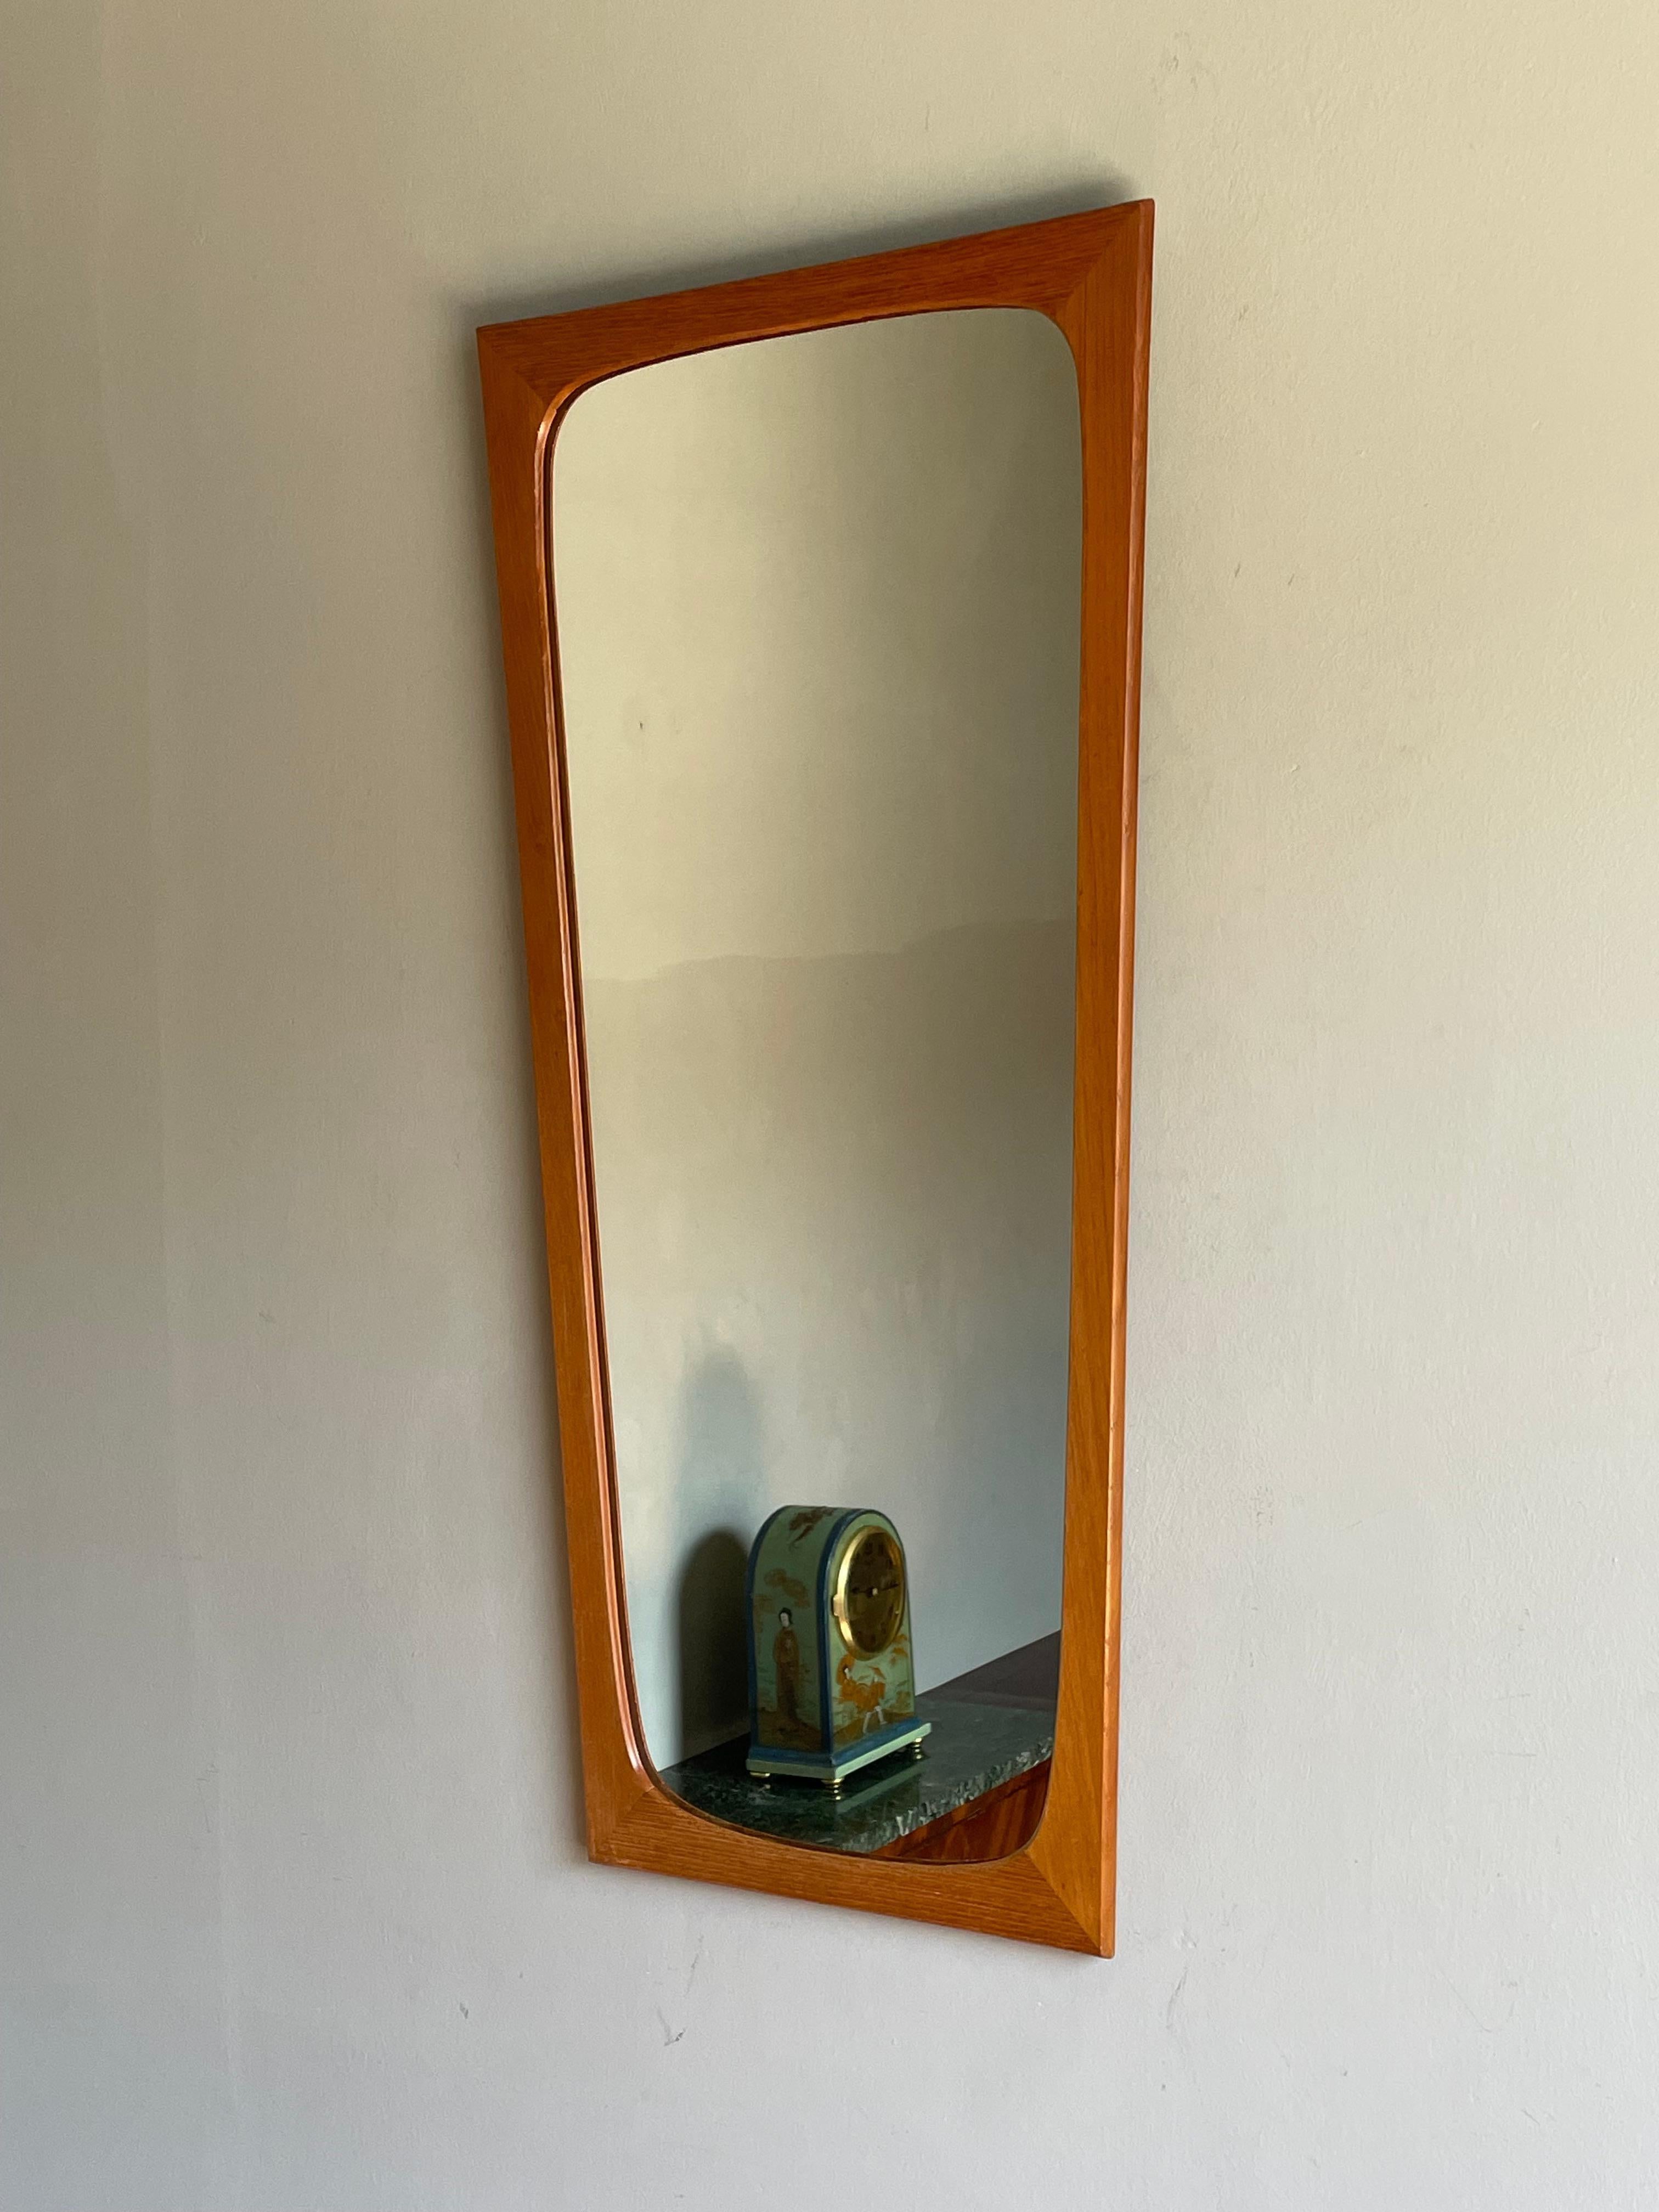 Sleek, stylish and clean midcentury mirror for wall mounting.

This midcentury, teakwood wall mirror is in superb condition from top to bottom and we think it is an interior designer's dream. Its design and light (or should we say fresh) color makes